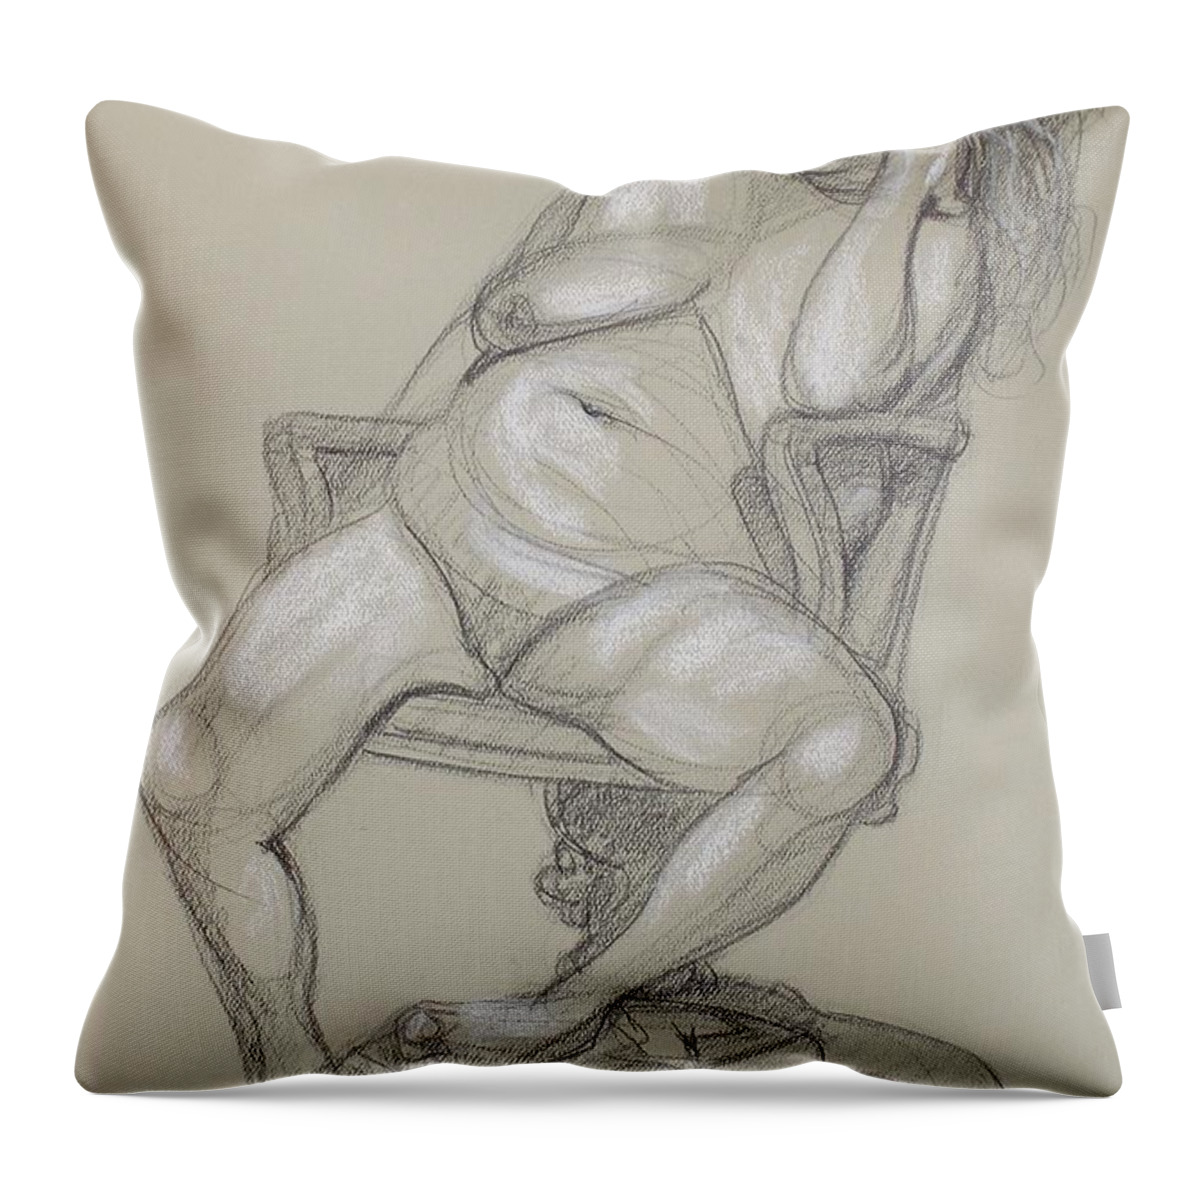 Realism Throw Pillow featuring the drawing Miriam 1 by Donelli DiMaria